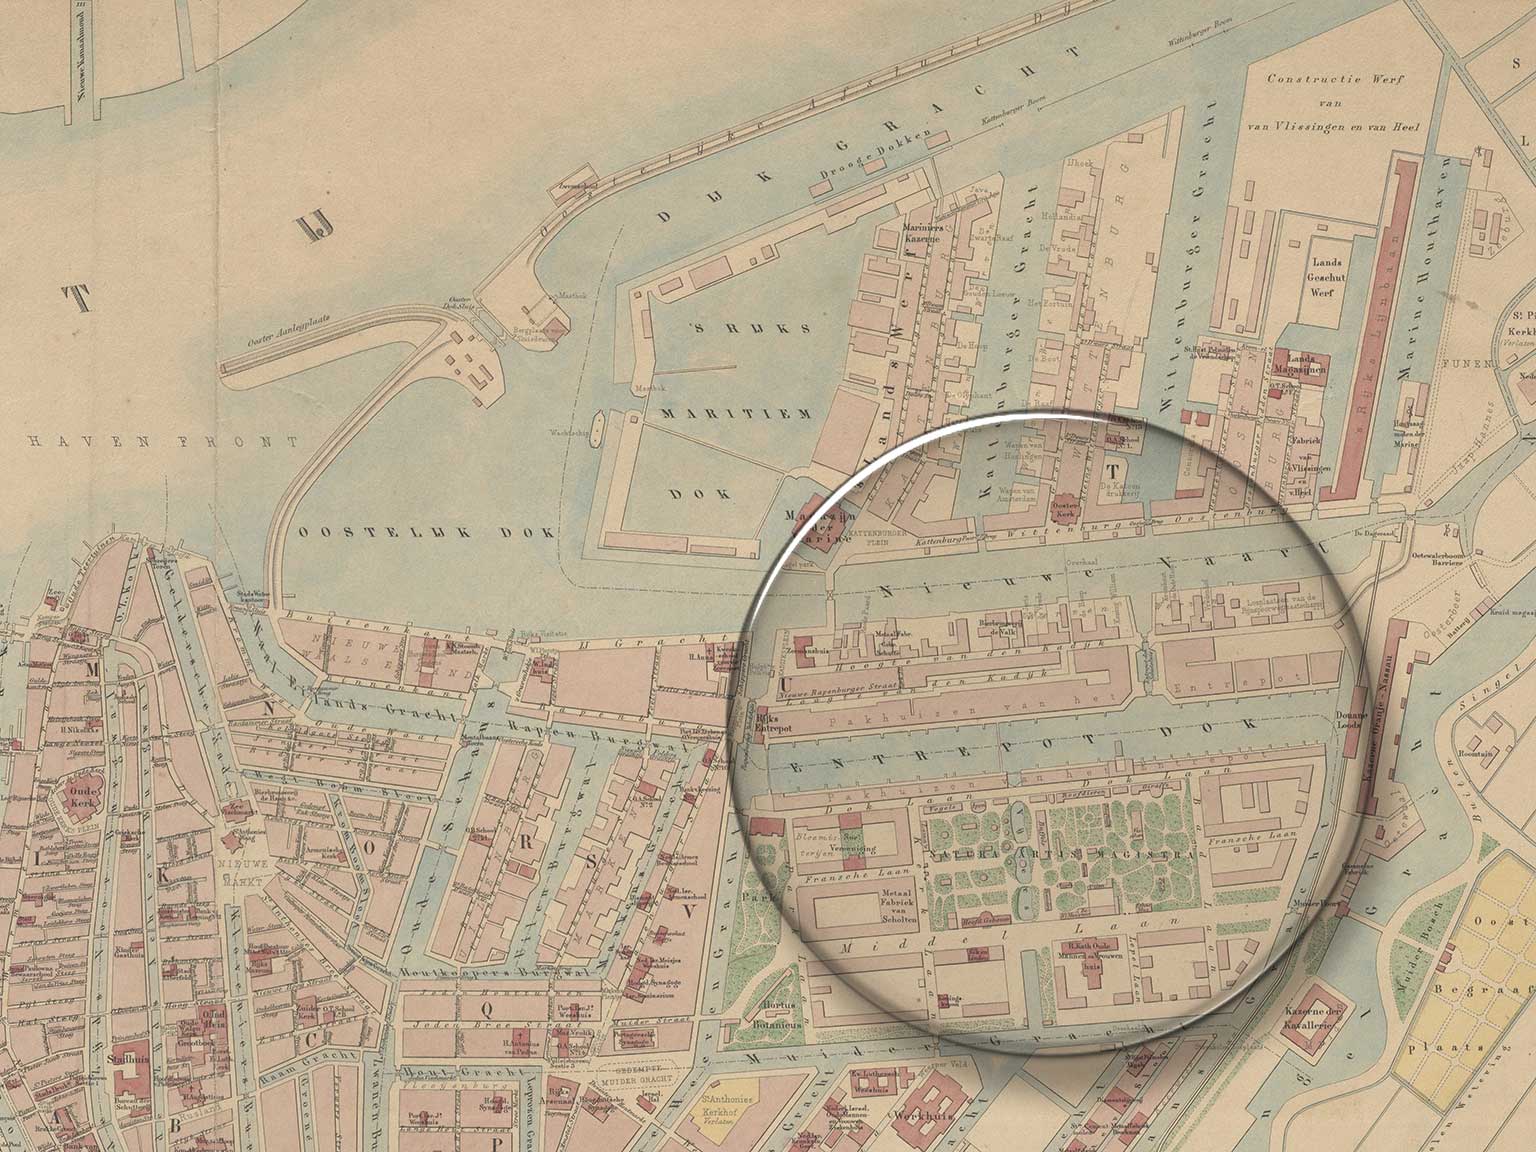 Entrepotdok, Amsterdam, on a map from 1867